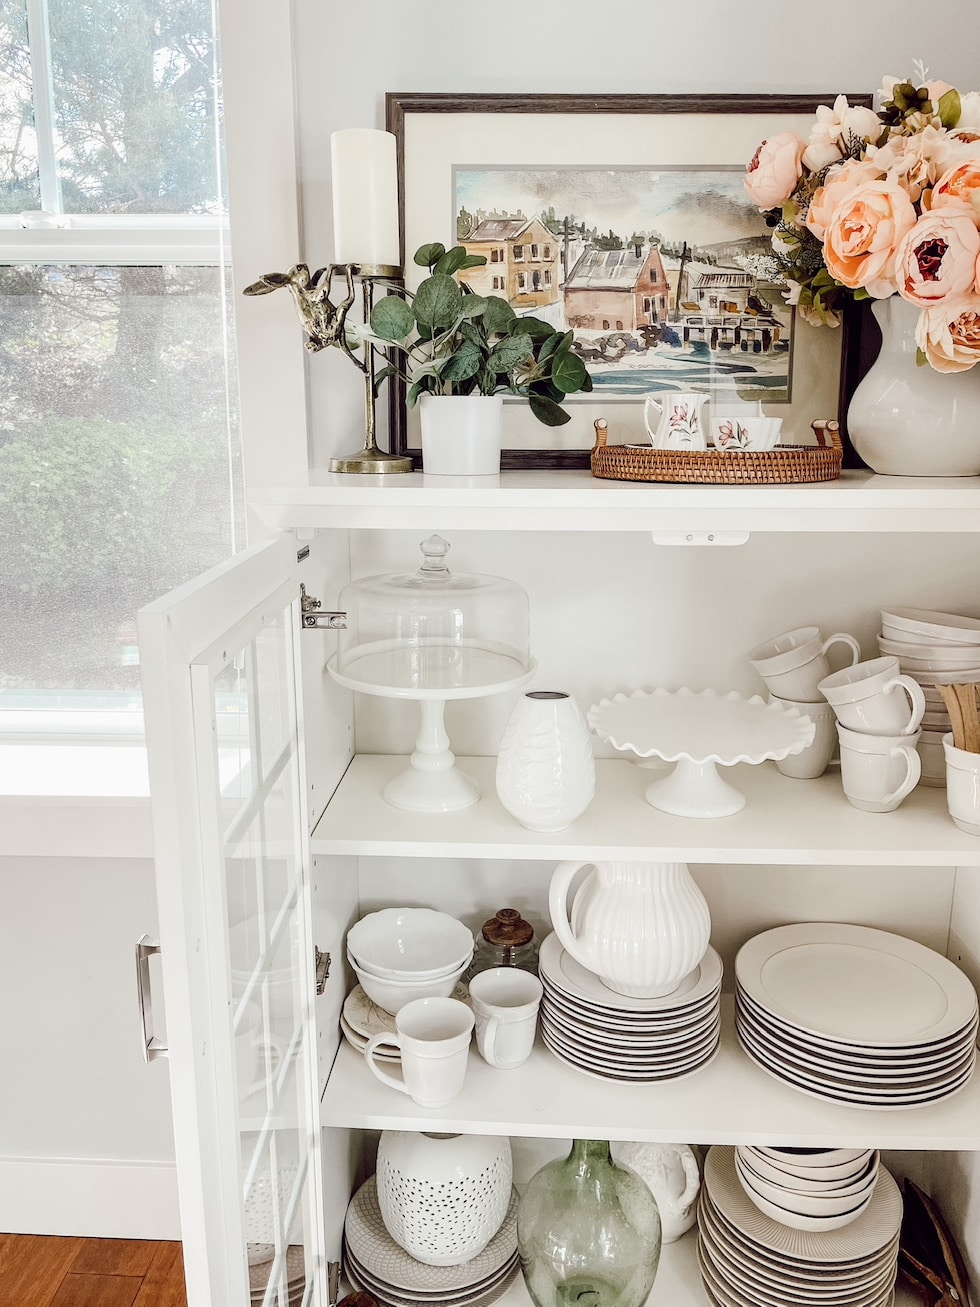 Small Space Storage Tips + Making Room for What You Love